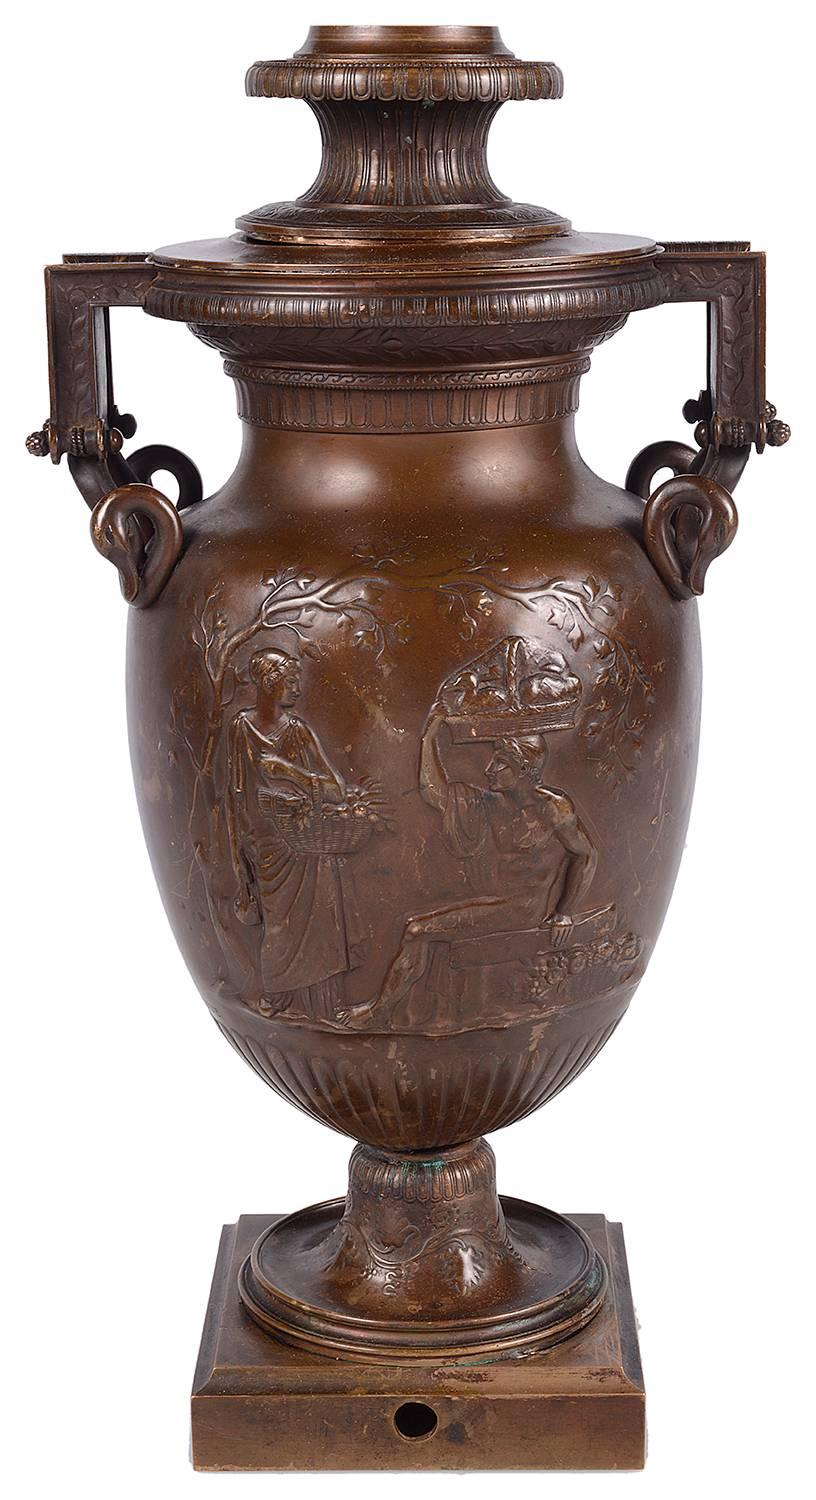 A good quality late 19th century bronze lamp in the Greco-Roman style, having classical figures in the gardens and swan neck handles.